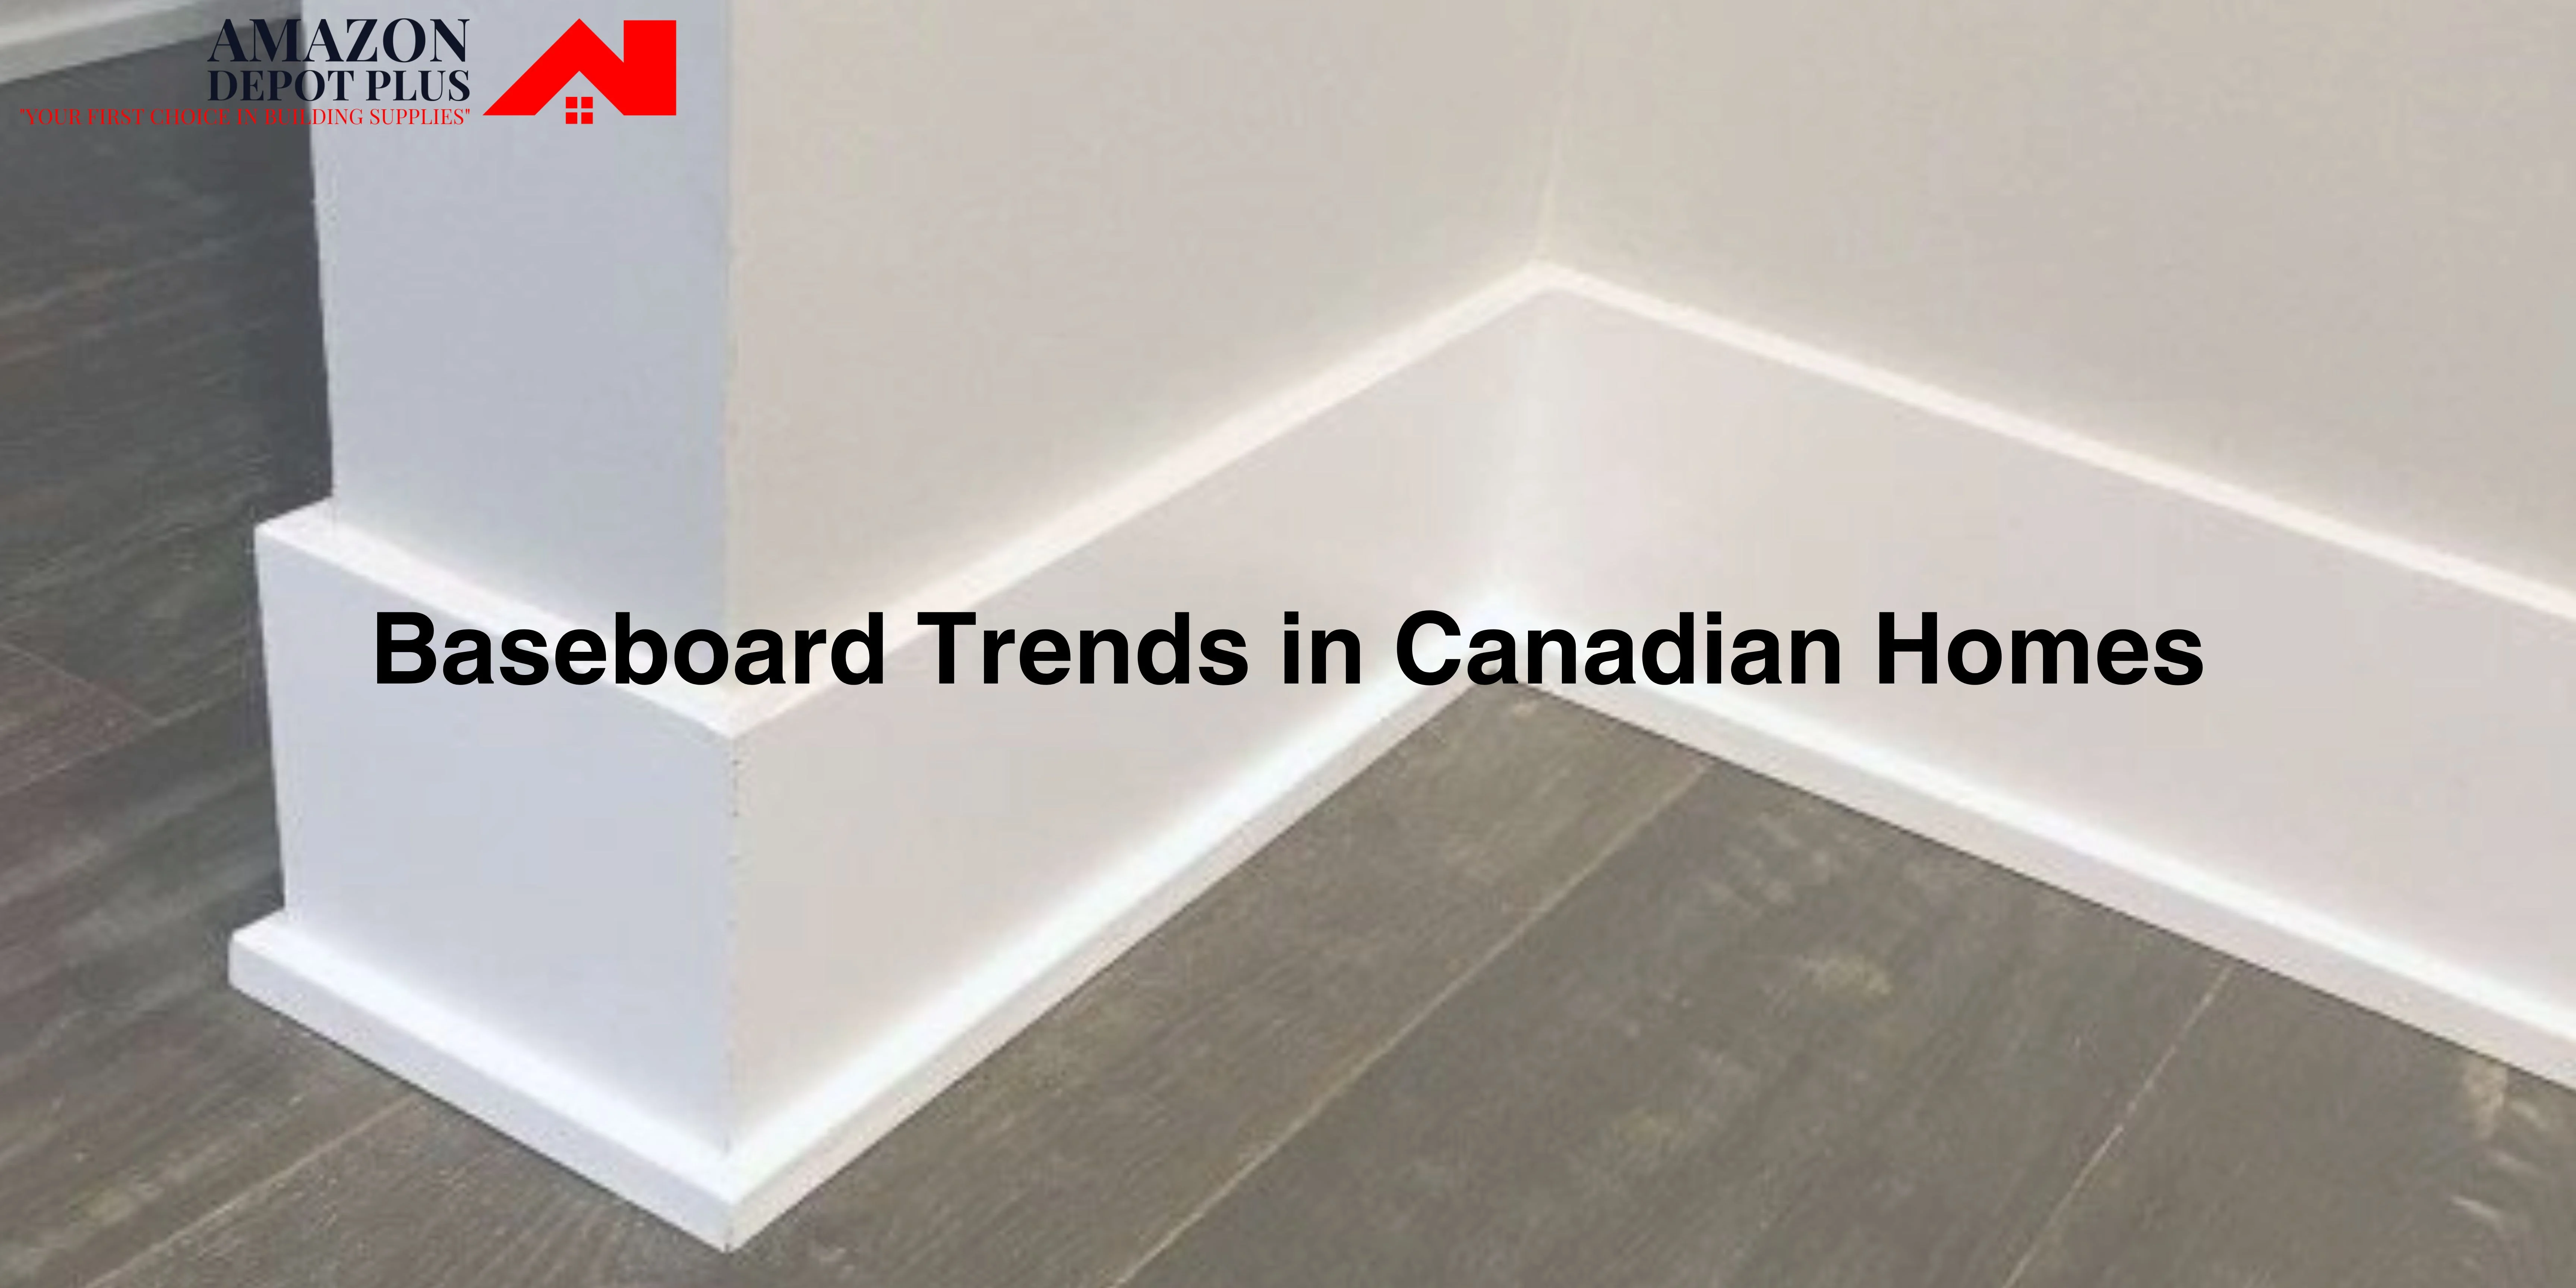 Baseboard Trends in Canadian Homes